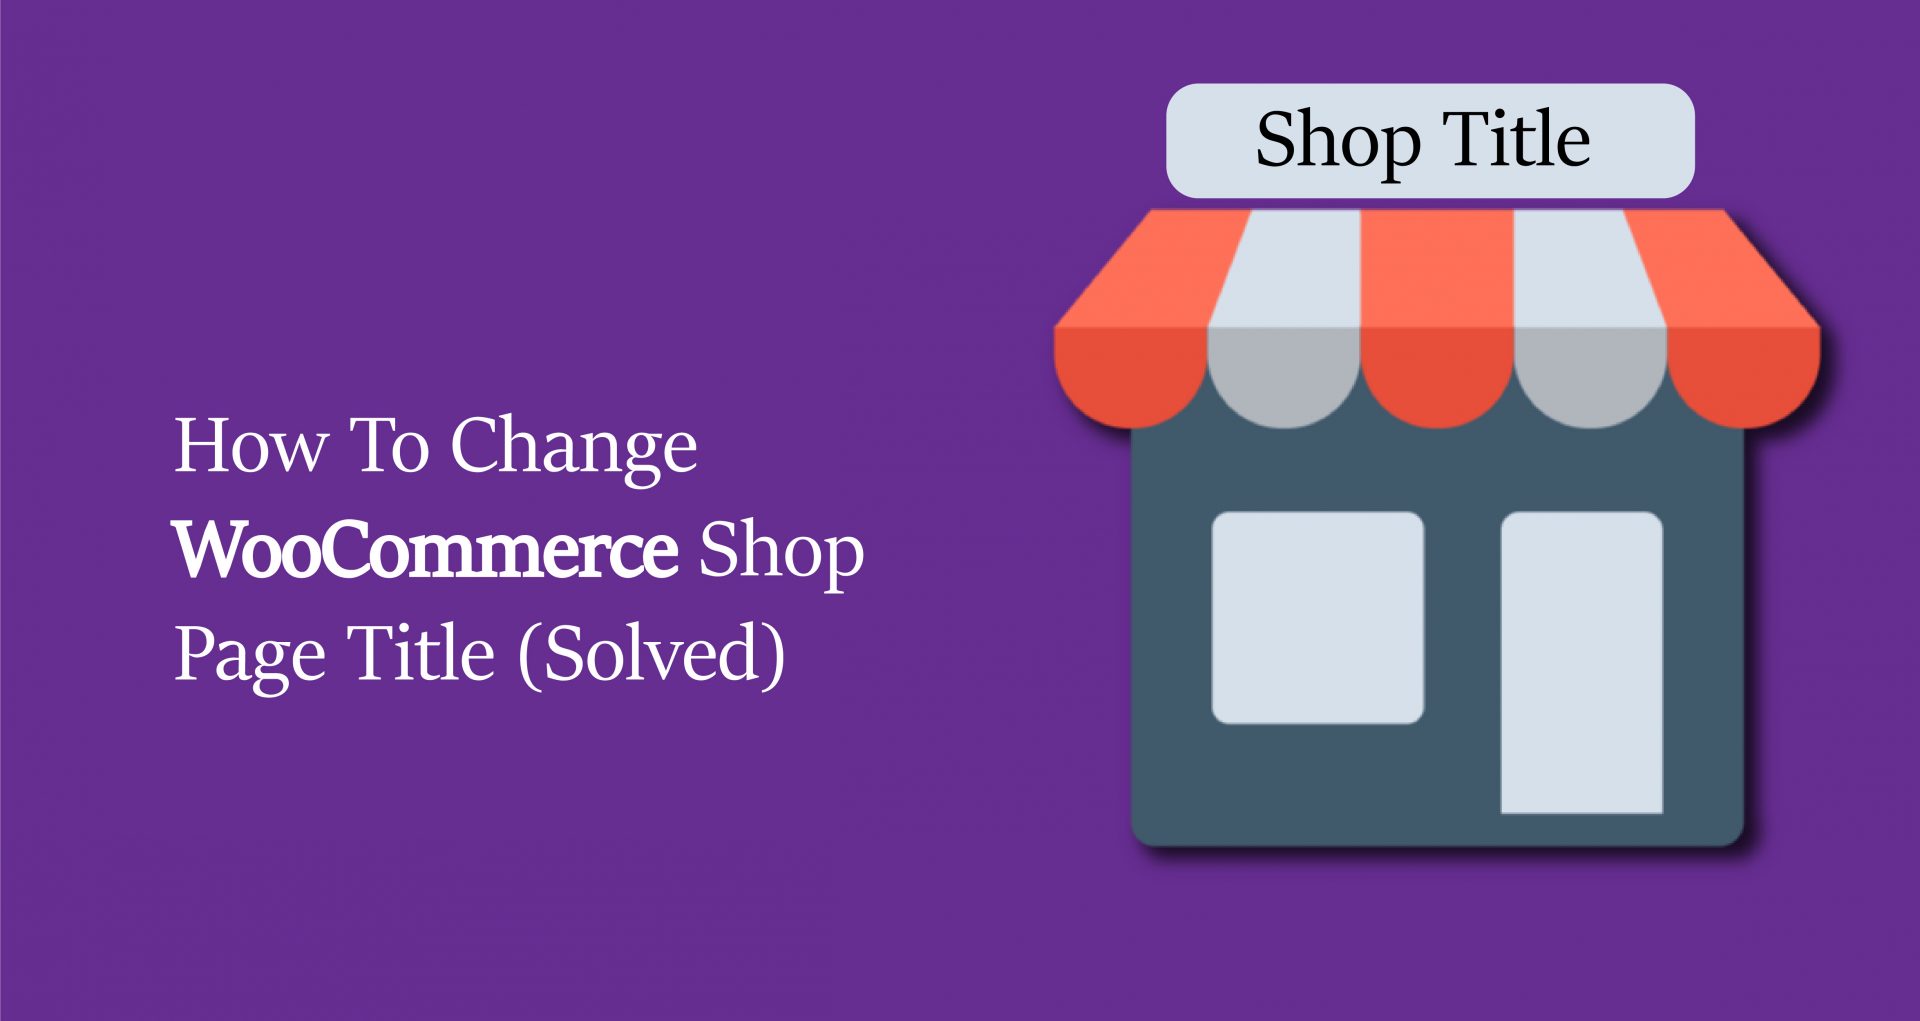 How To Change WooCommerce Shop Page Title